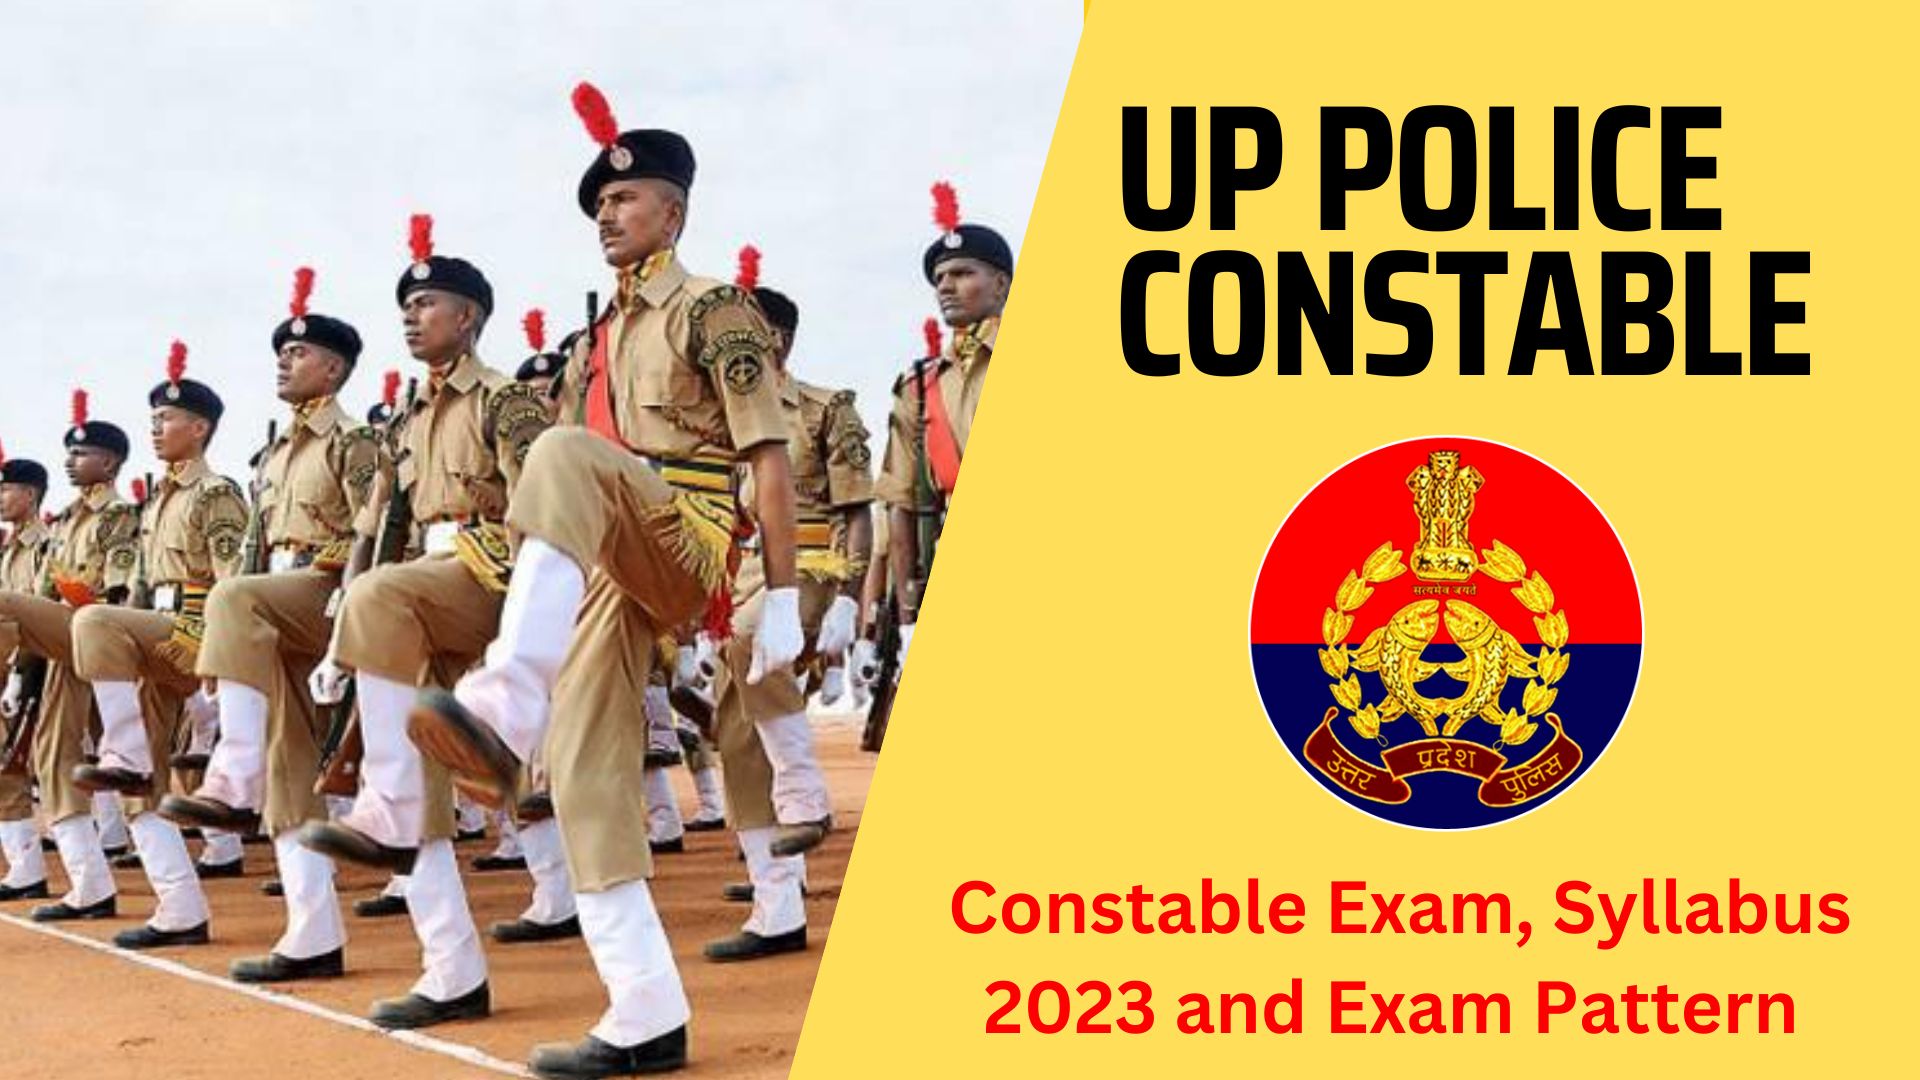 UP Police Constable Exam: Syllabus 2023 and Exam Pattern